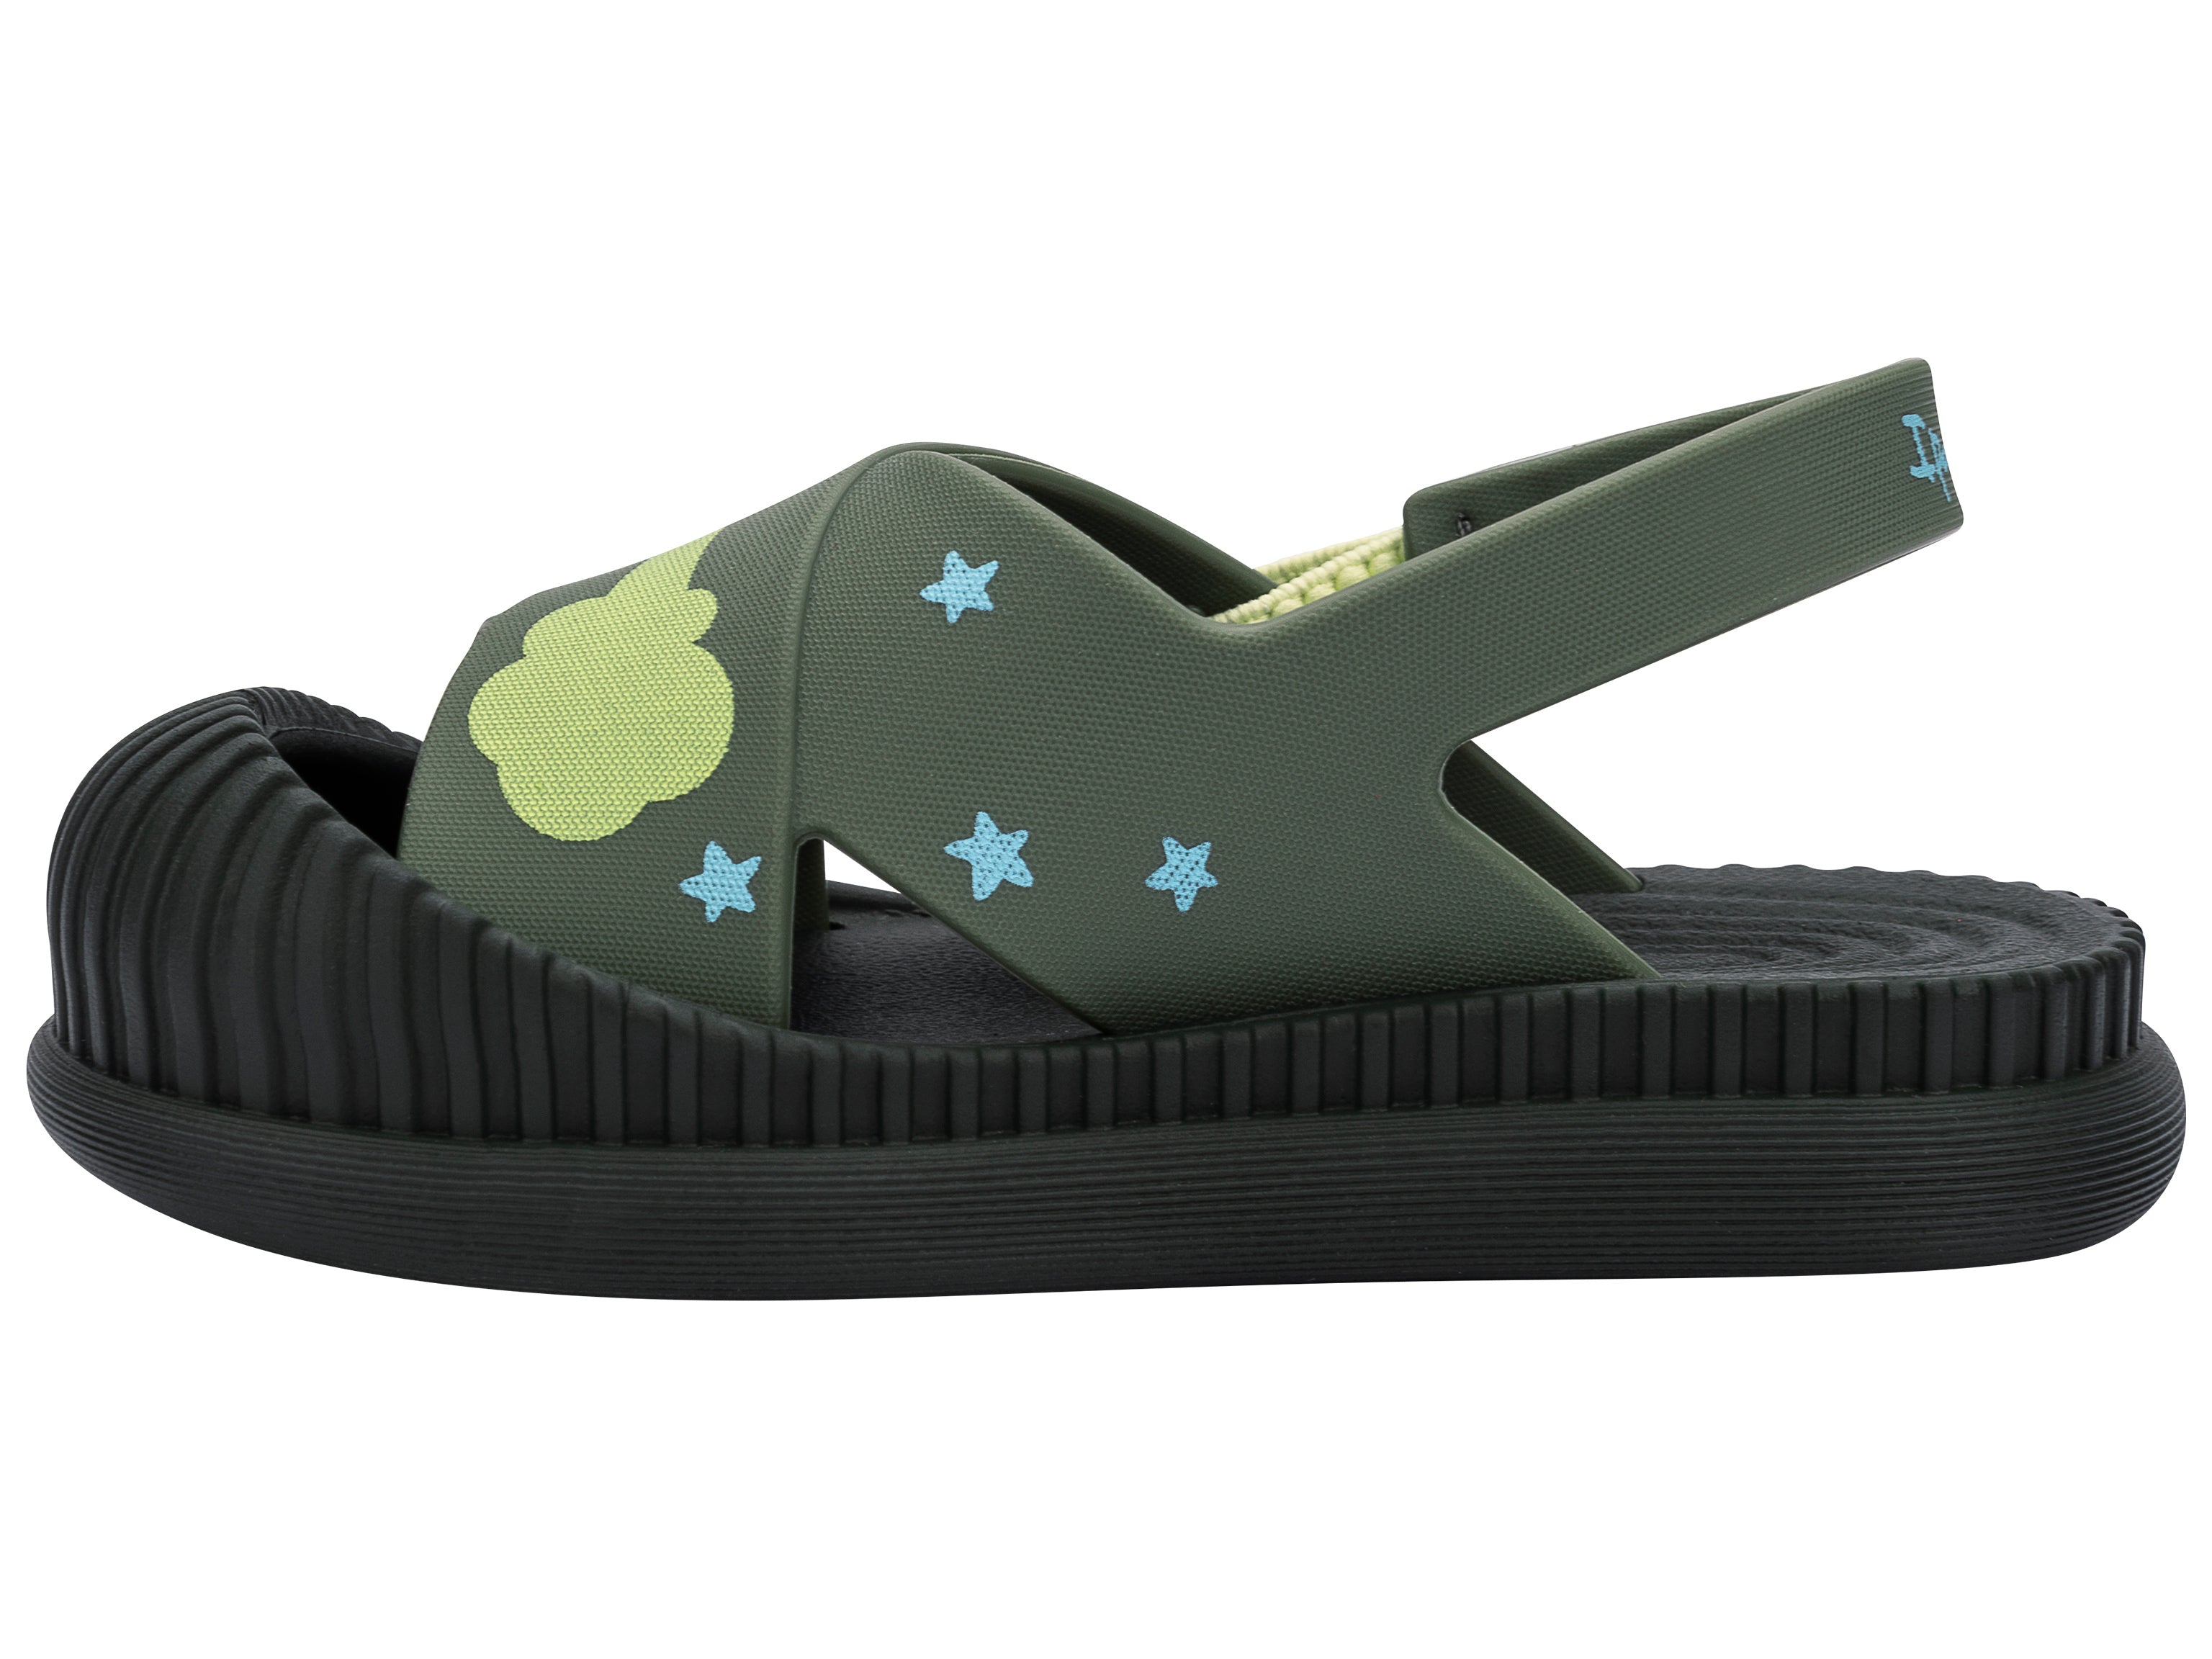 Inner side view of a green Ipanema Cute baby sandal with rocket ship on the strap.